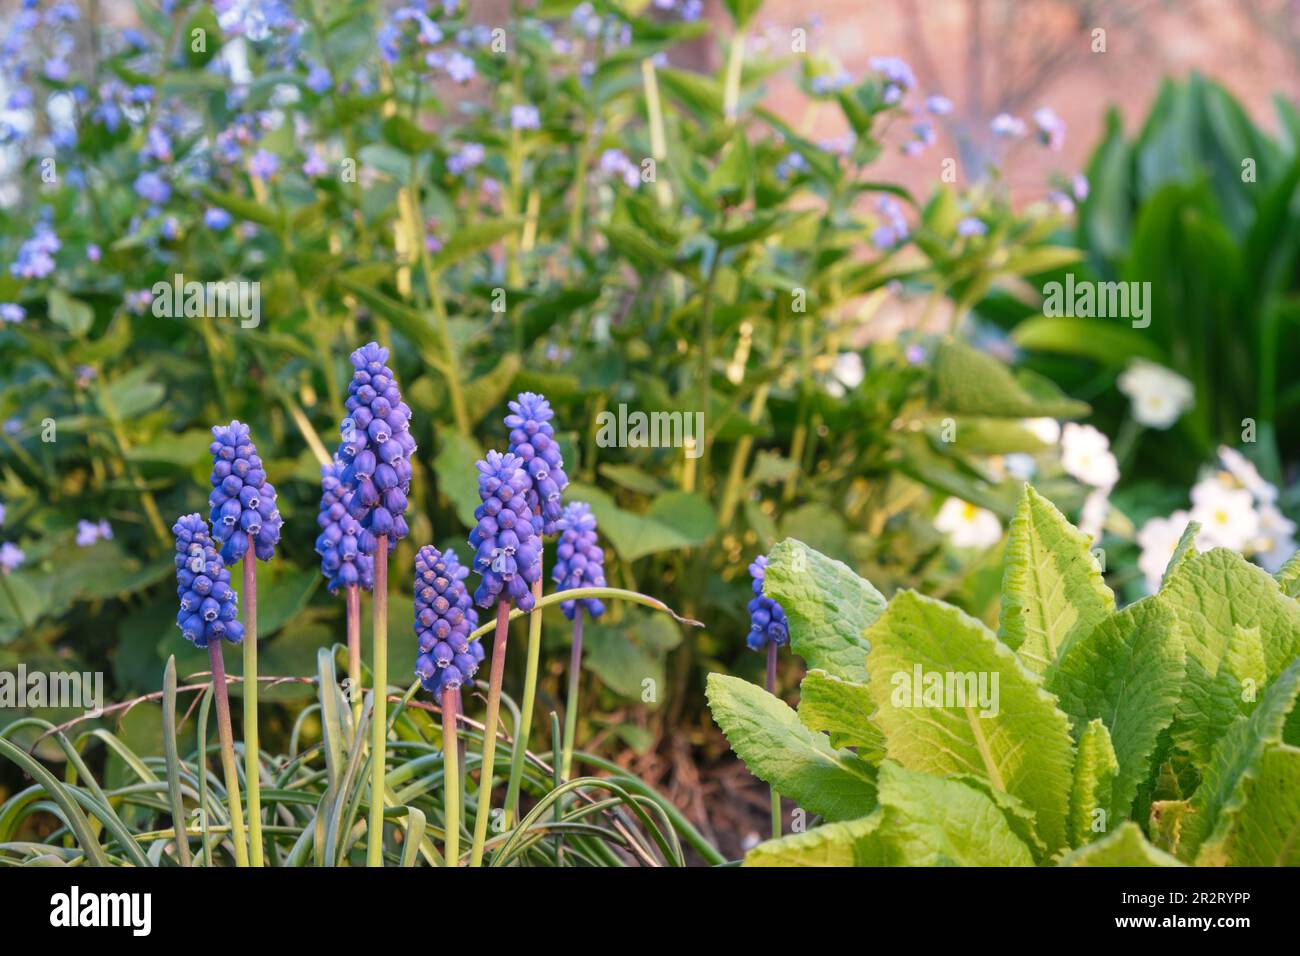 grape hyacinth close-up. Many flowers. Grows in a natural environment in the garden.Floral background Stock Photo